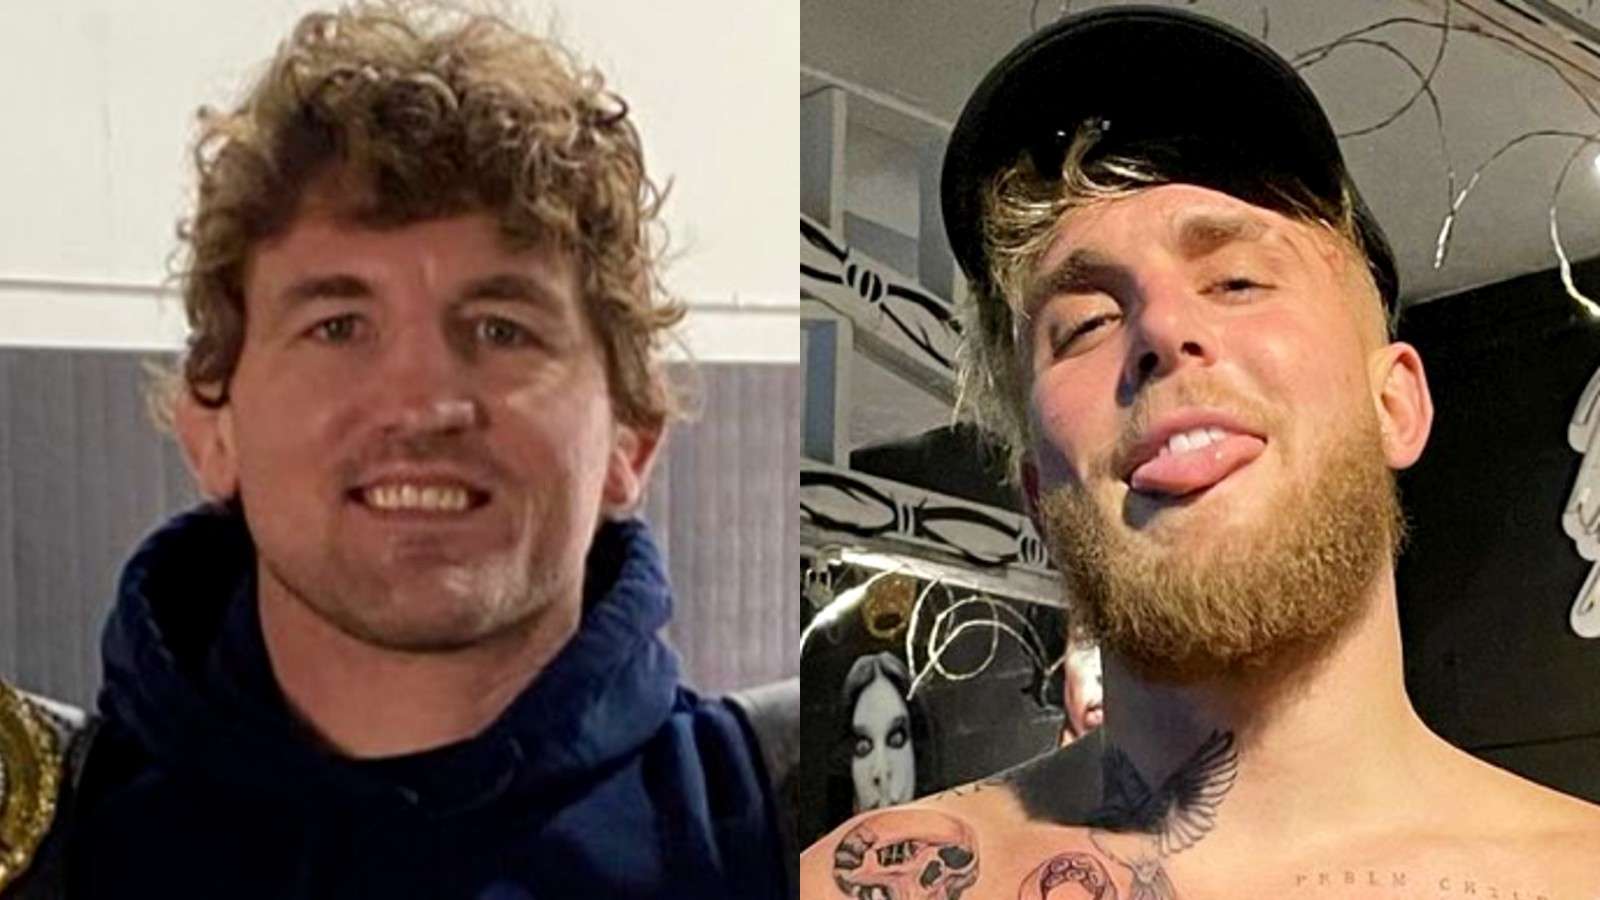 Ben Askren and Jake Paul in pictures next to each other